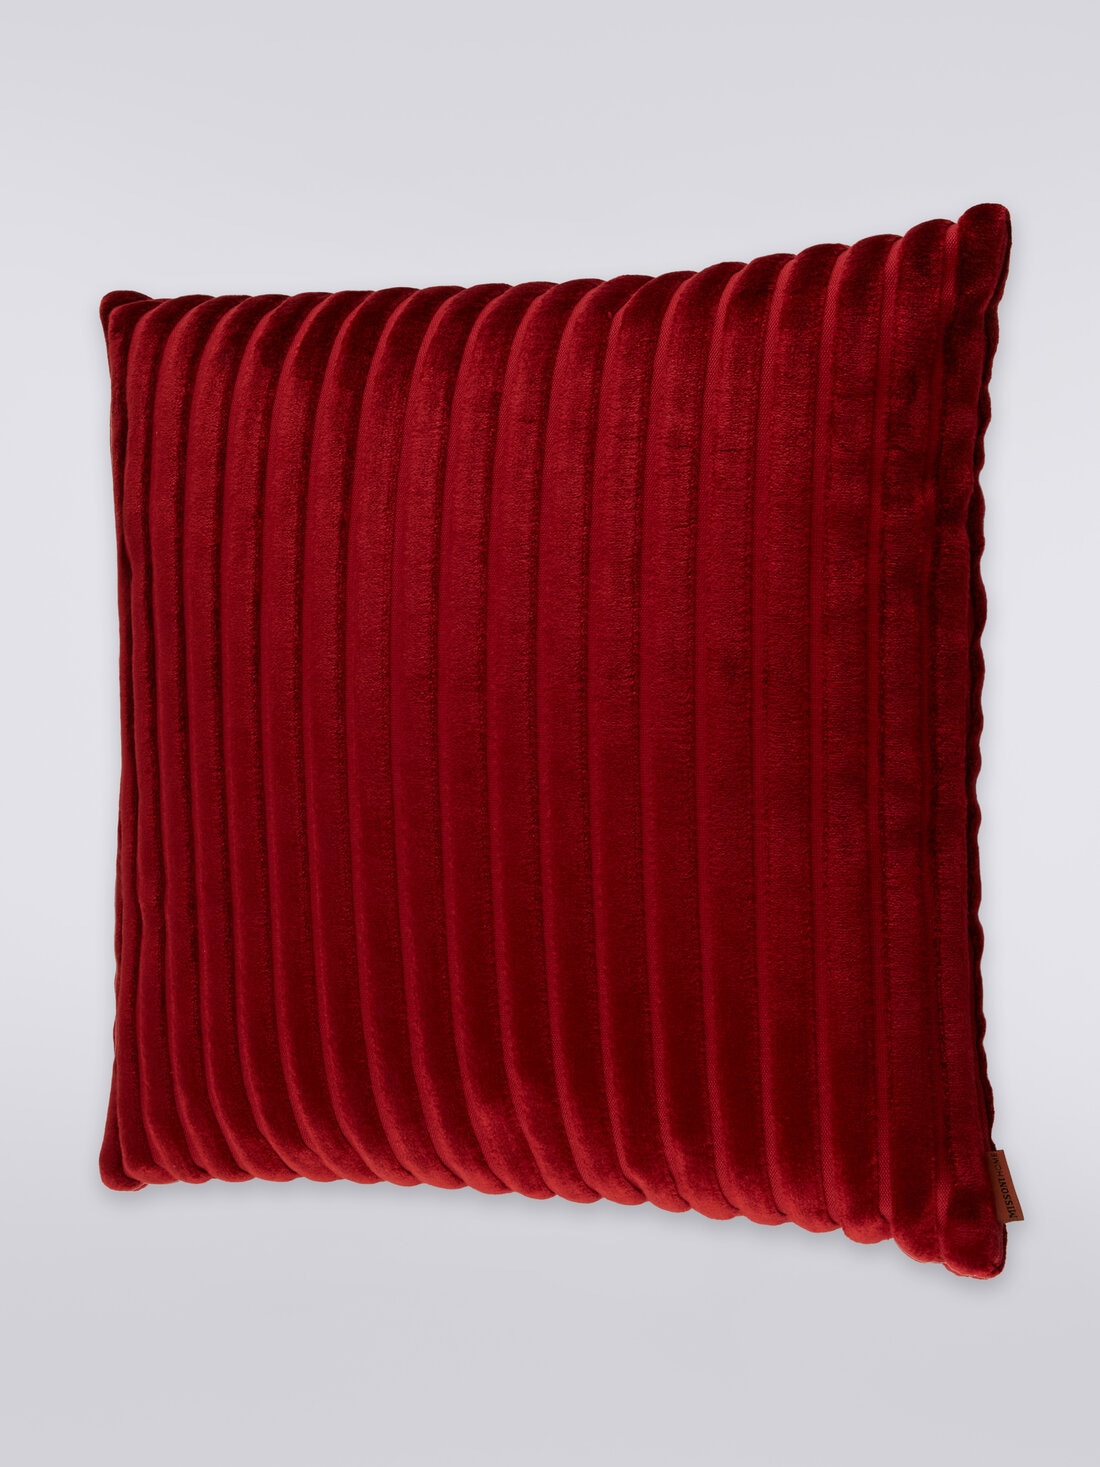 Coomba Cushion 40X40, Red  - 8033050653744 - 1